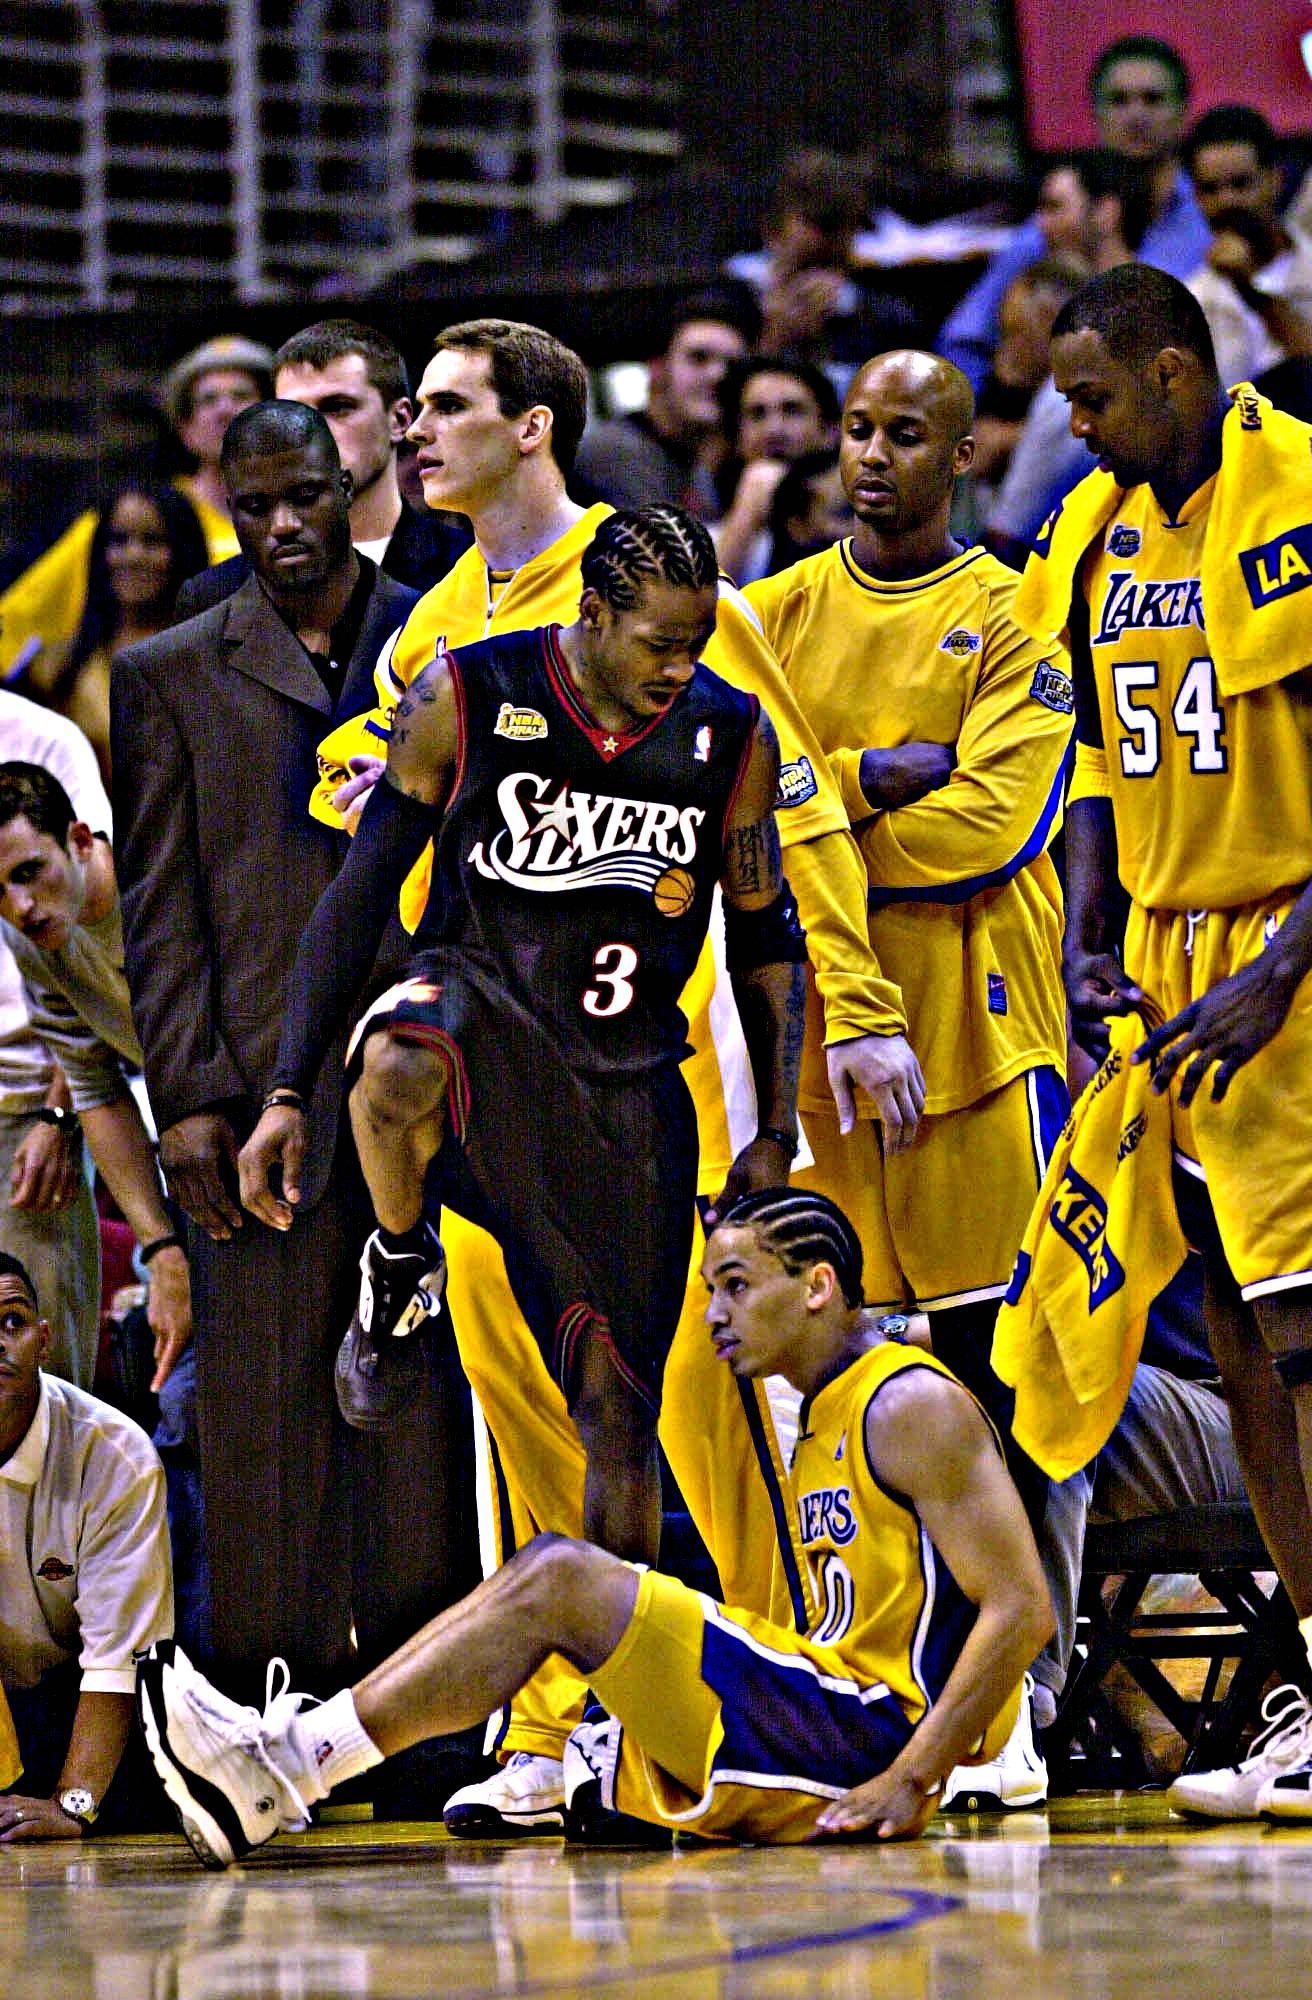 NBA on ESPN on Twitter: "14 years ago today, this iconic moment